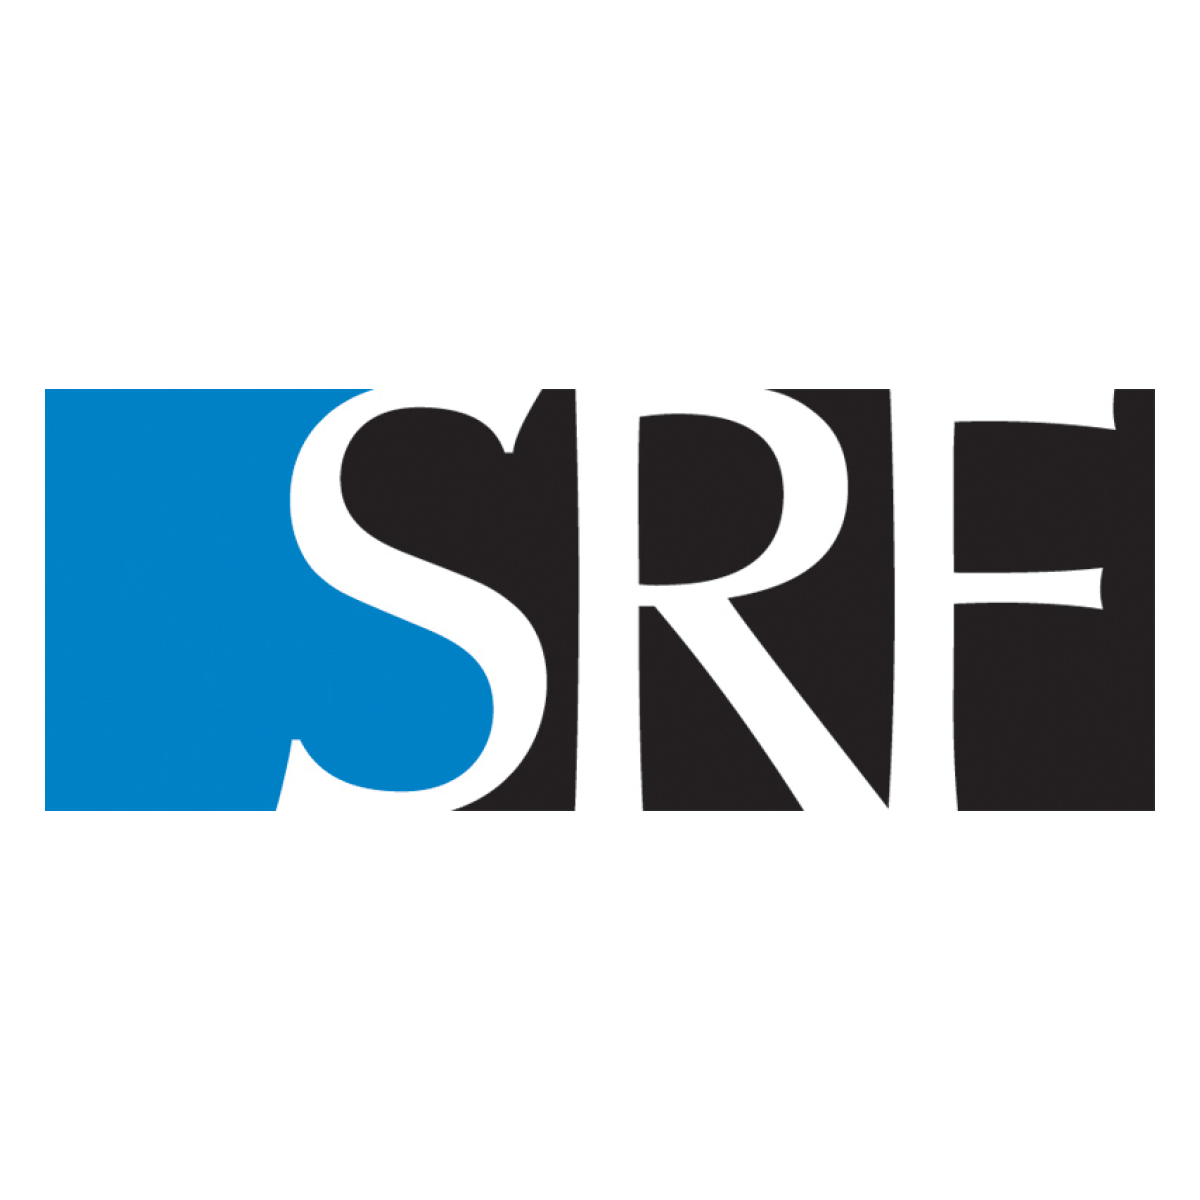 SRF Consulting Group logo